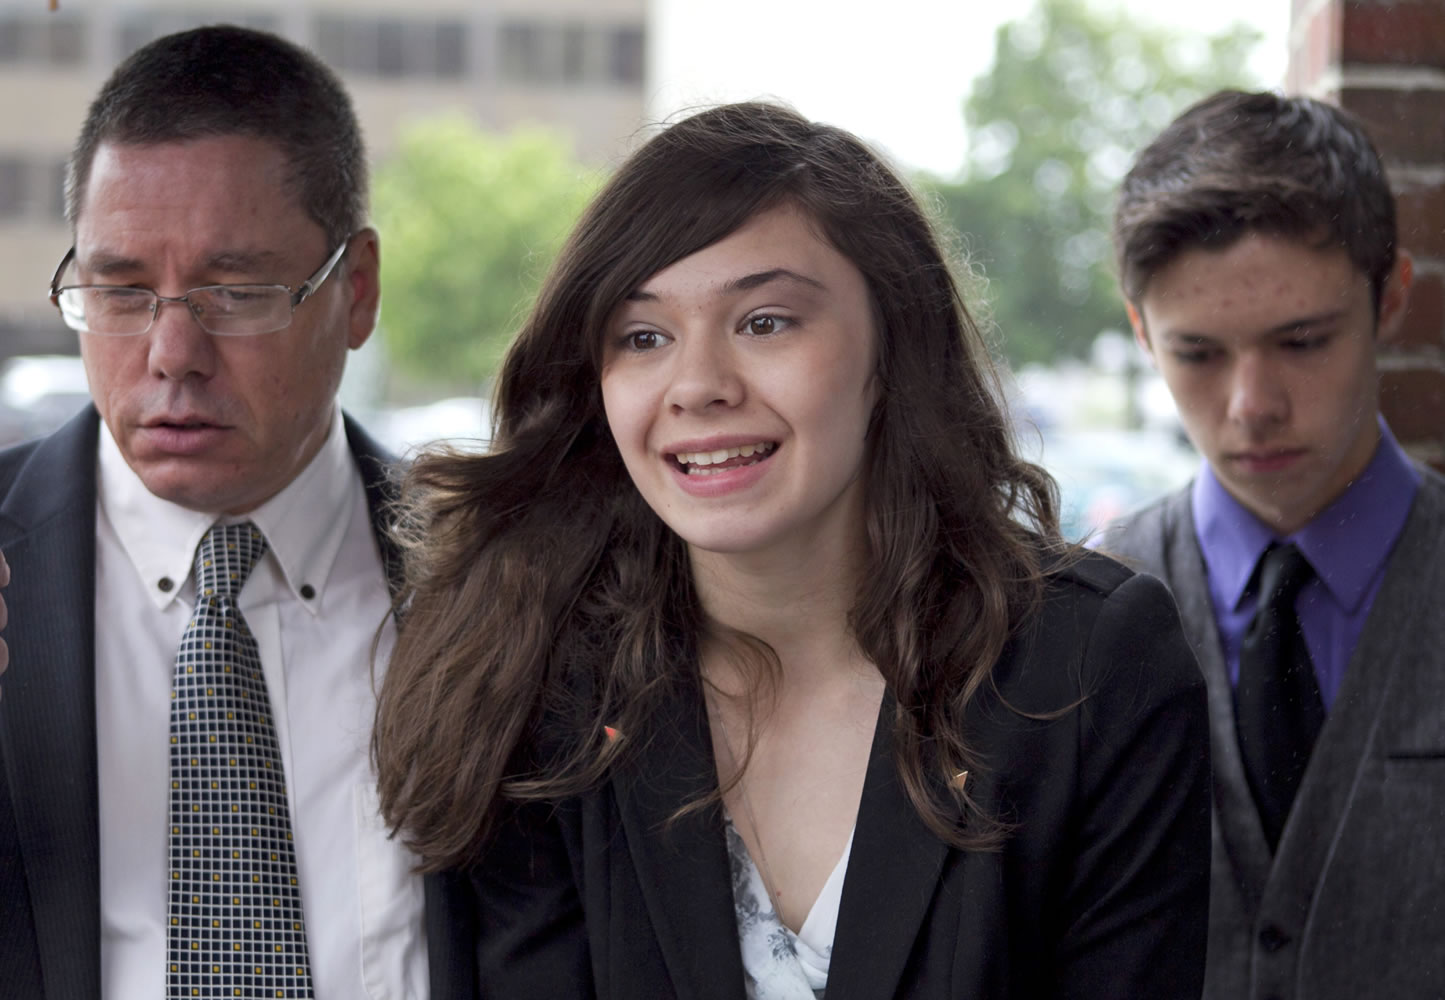 Transgender student Nicole Maines, center, with her father, Wayne Maines, left, and brother, Jonas, speaks to reporters outside the Penobscot Judicial Center in Bangor, Maine, on June 12.